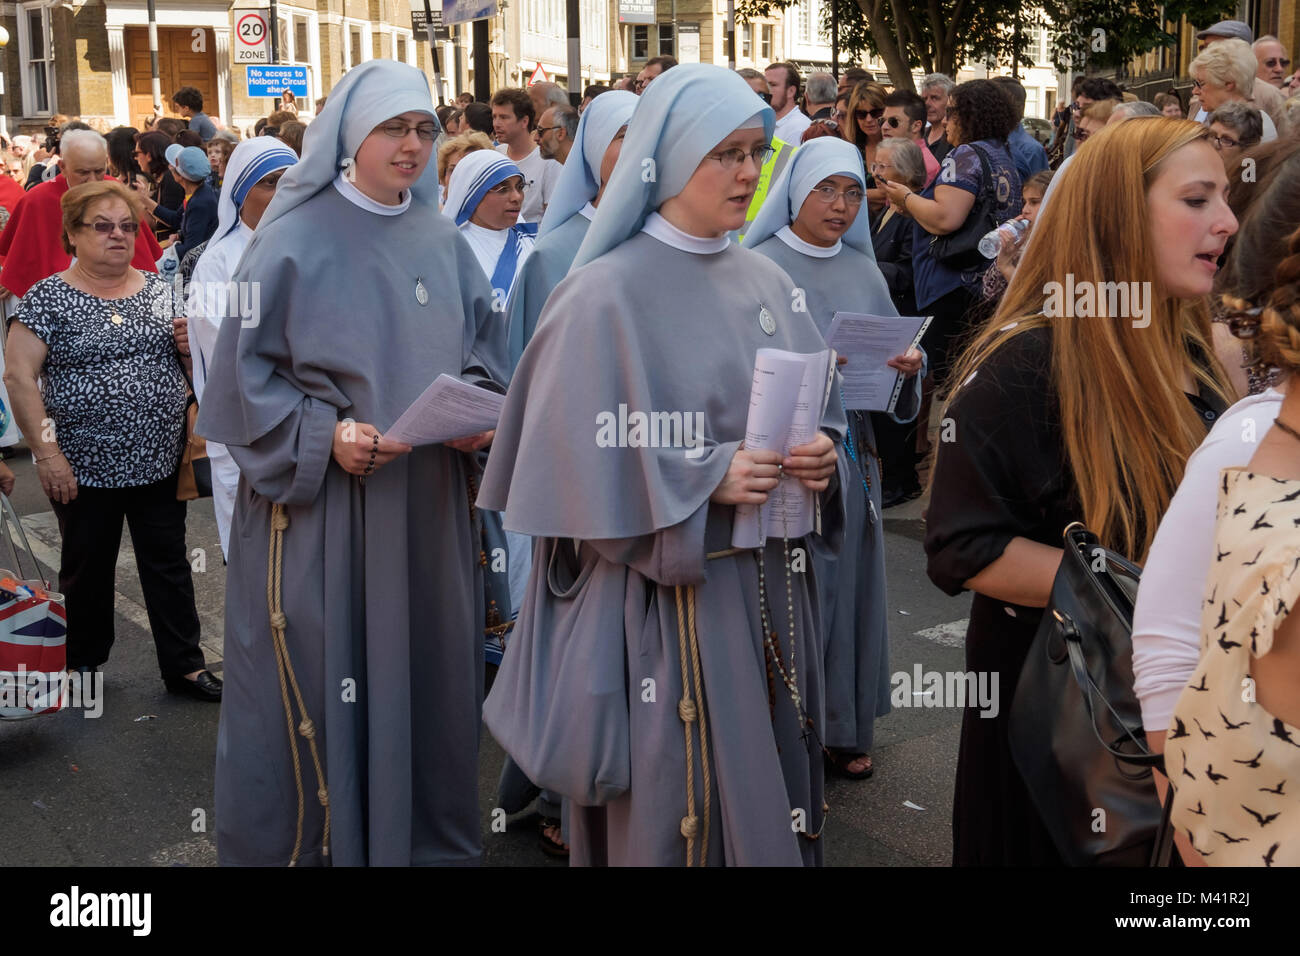 Nunds join in the singing at the Festival of Our Lady of Mount Carmel as the procession makes its way around the area close to the Italian Church in Clerkenwell. Stock Photo